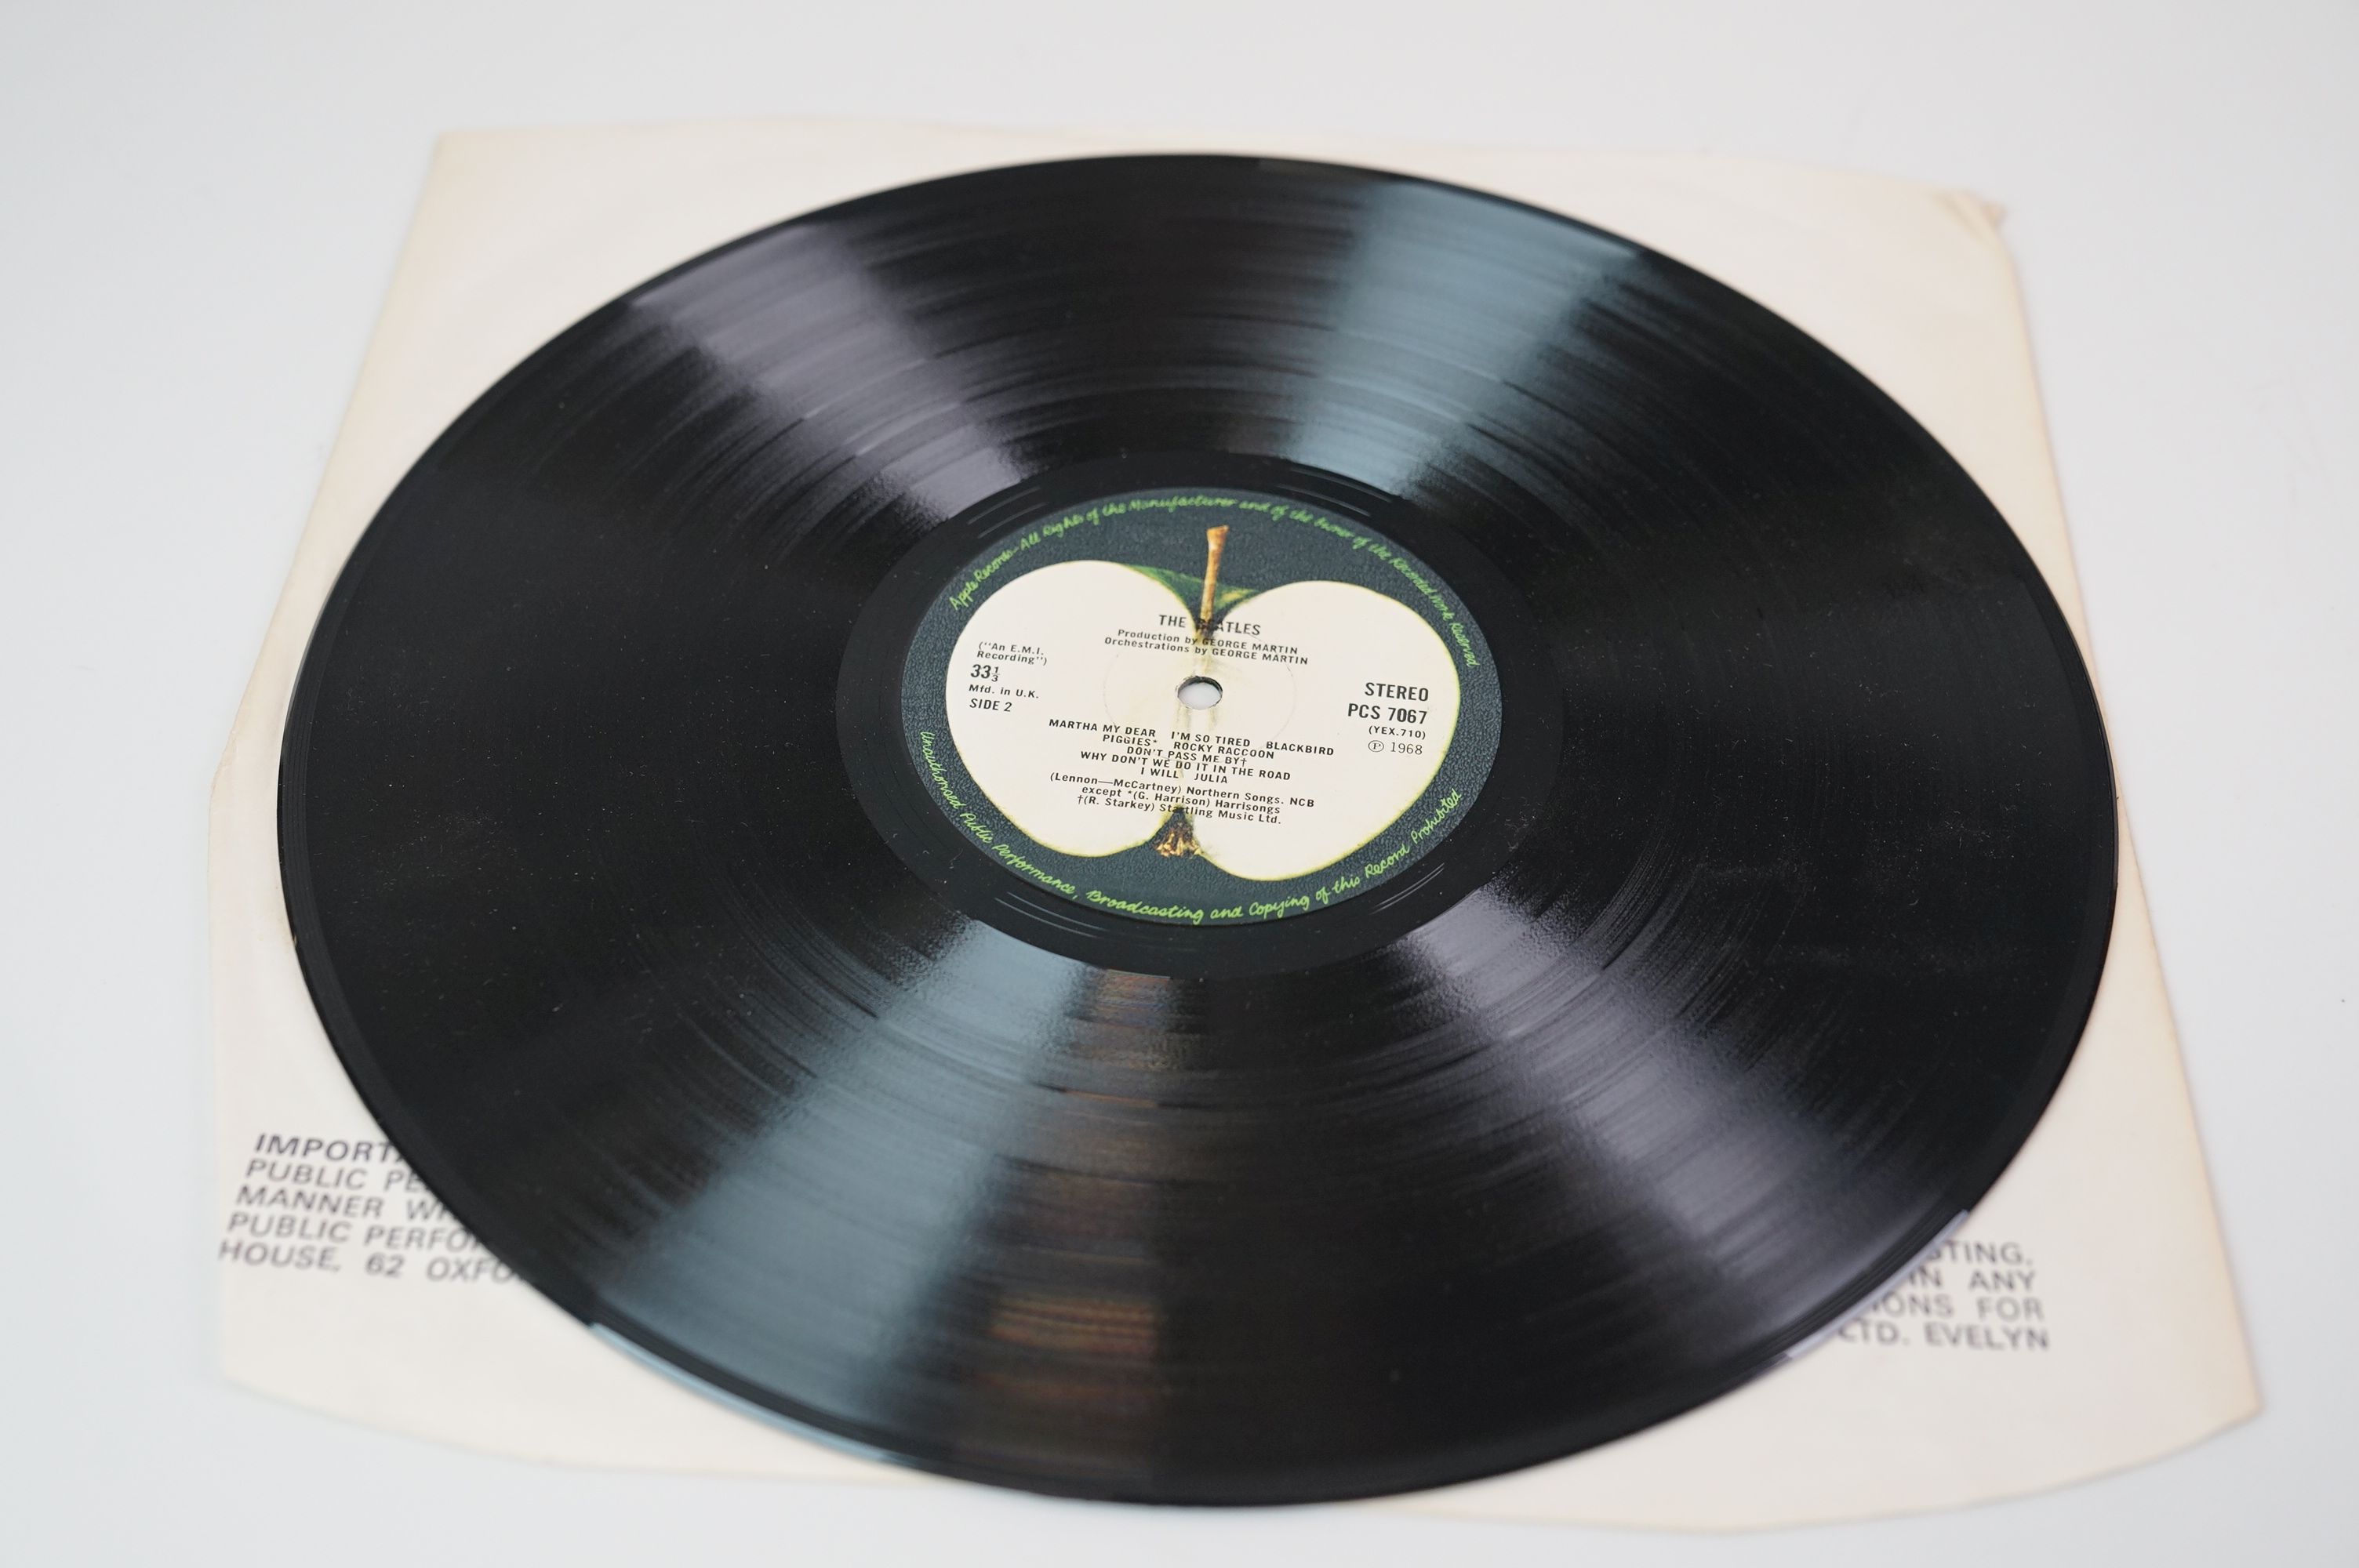 Vinyl - The Beatles White Album PCS7067/8 Stereo side opener no. 296130, 4 photographs and poster ex - Image 10 of 17